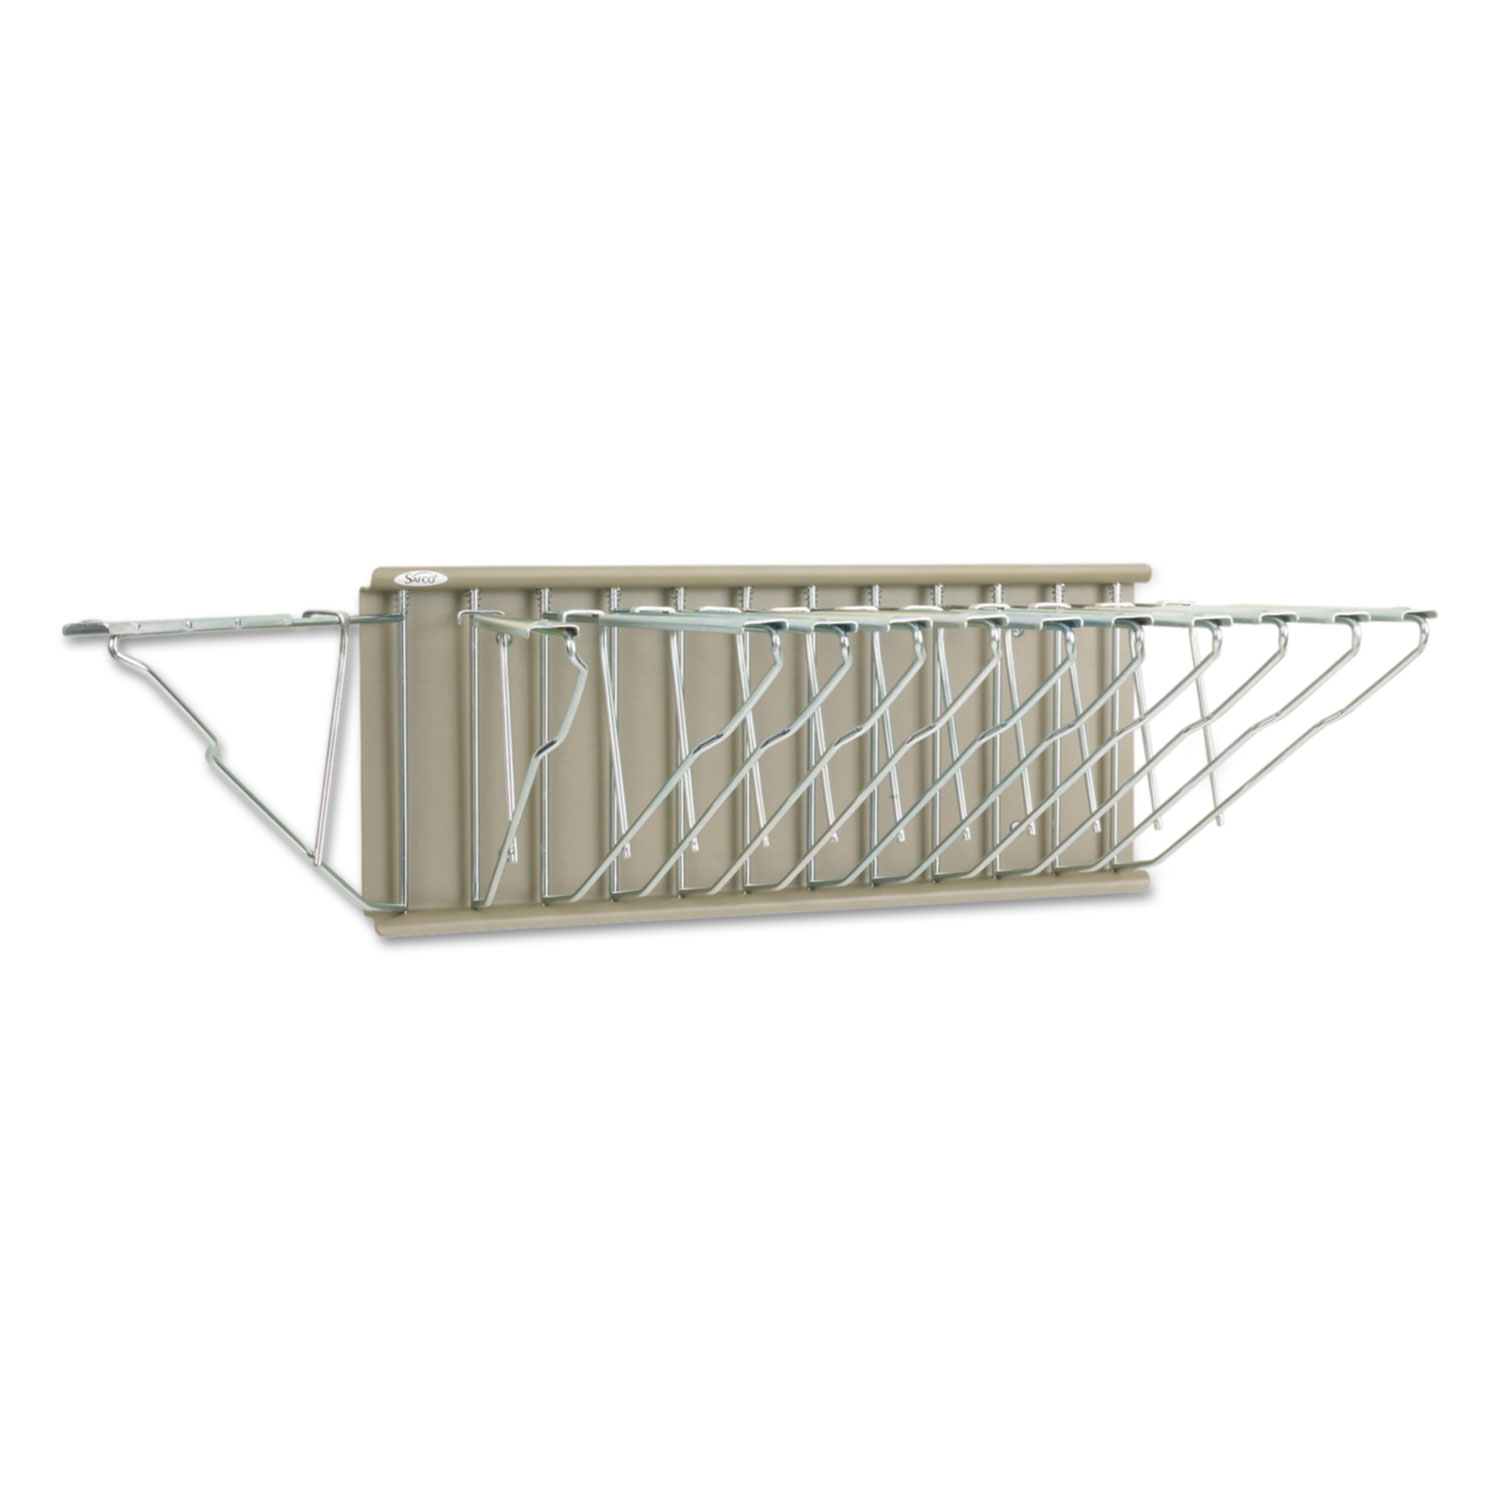  Safco 5016 Sheet File Pivot Wall Rack, 12 Hanging Clamps, 24w x 14.75d x 9.75h, Sand (SAF5016) 